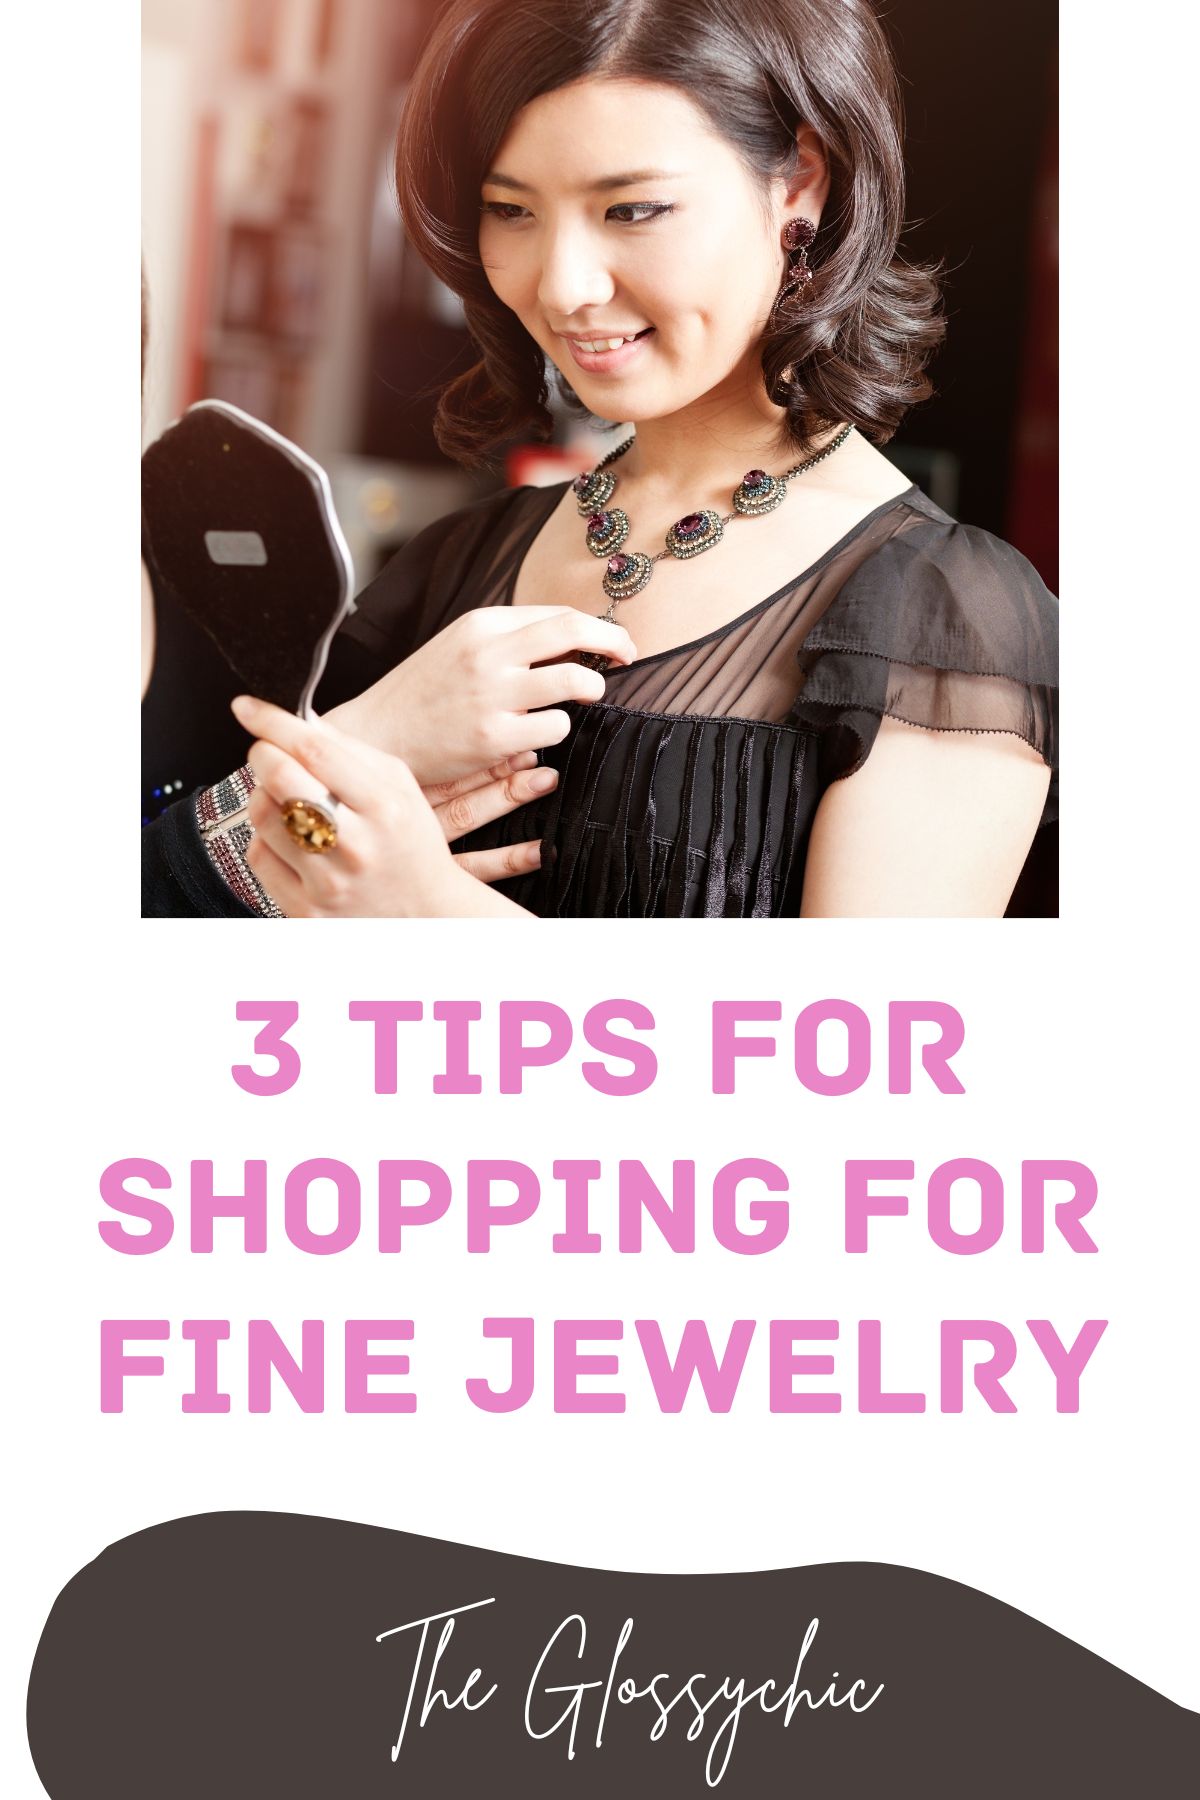 3 Tips for Shopping for Fine Jewelry